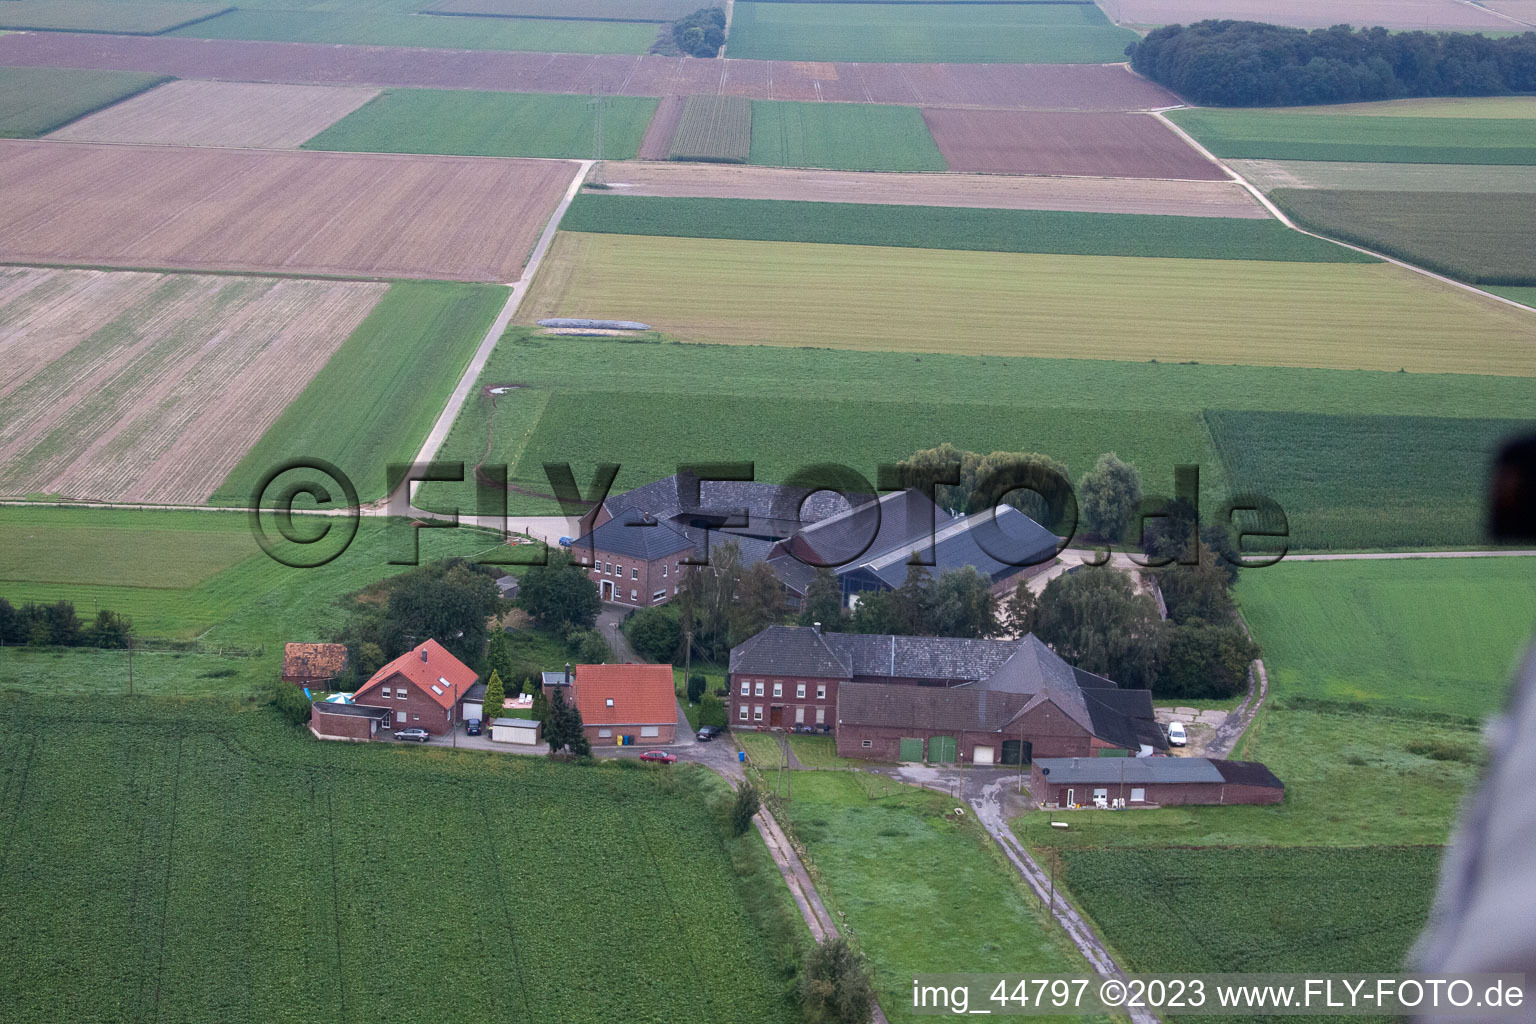 Grefrath in the state North Rhine-Westphalia, Germany from the drone perspective